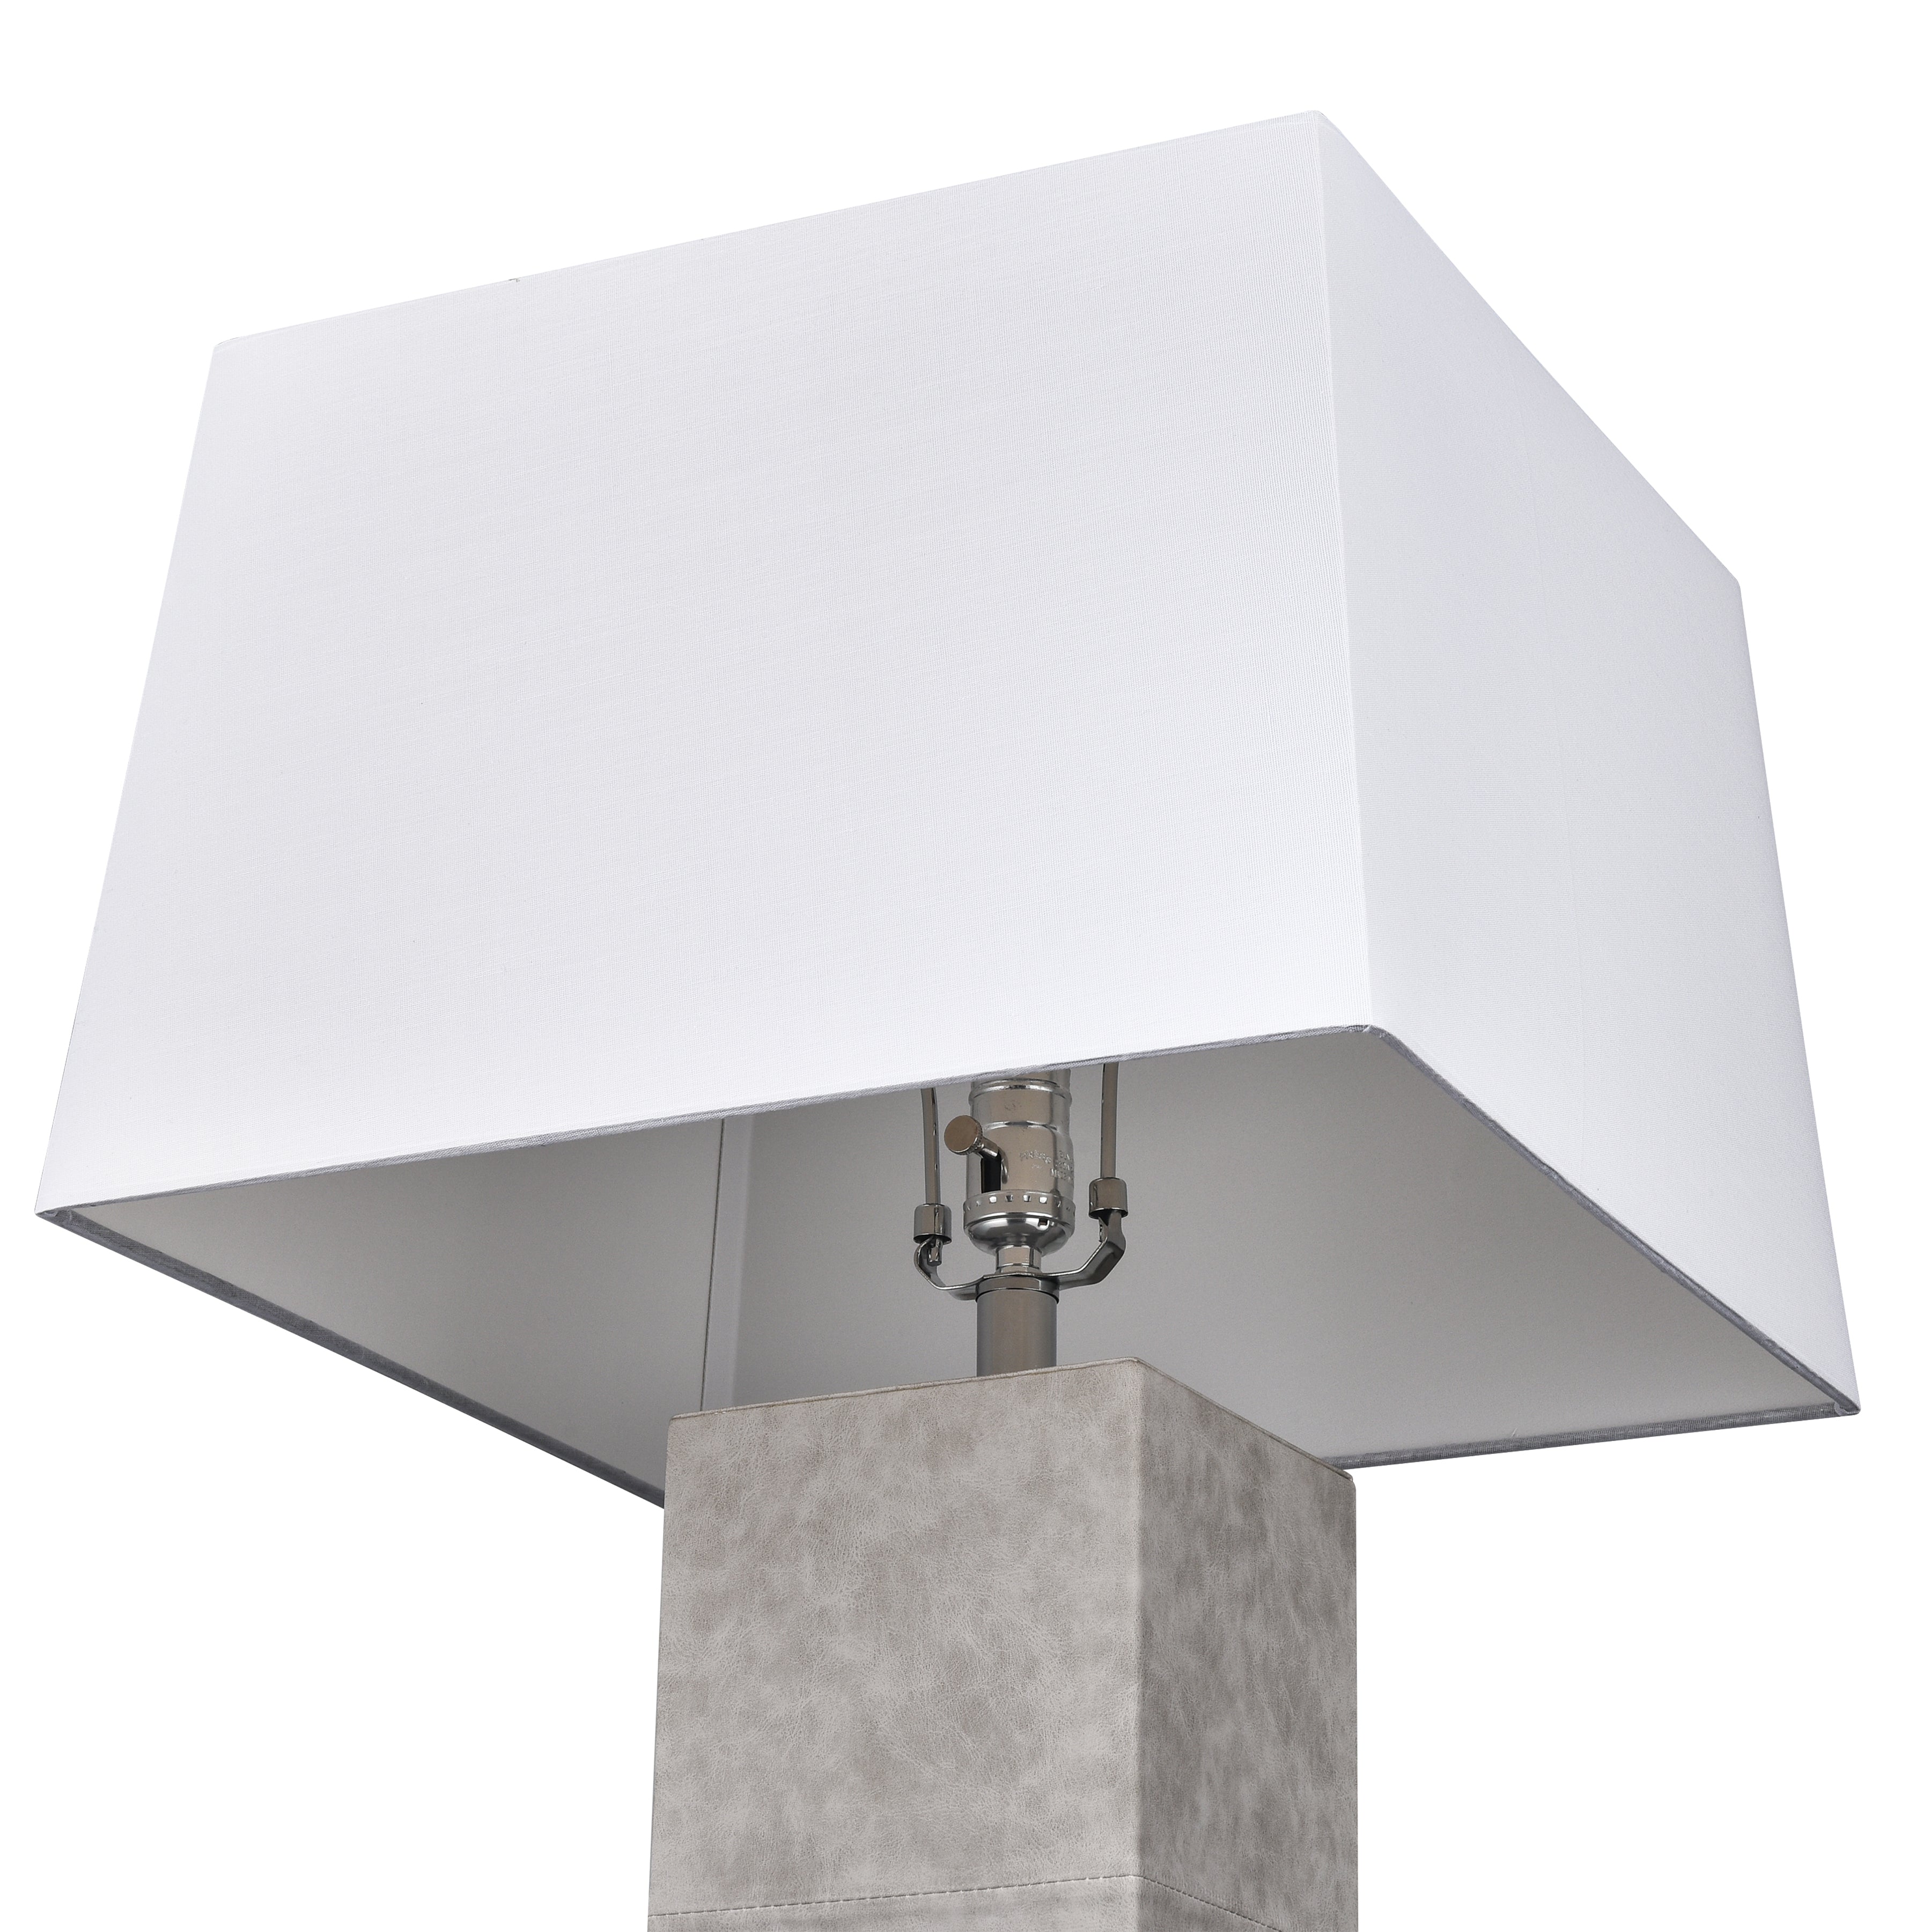 Unbound 32" High 1-Light Table Lamp